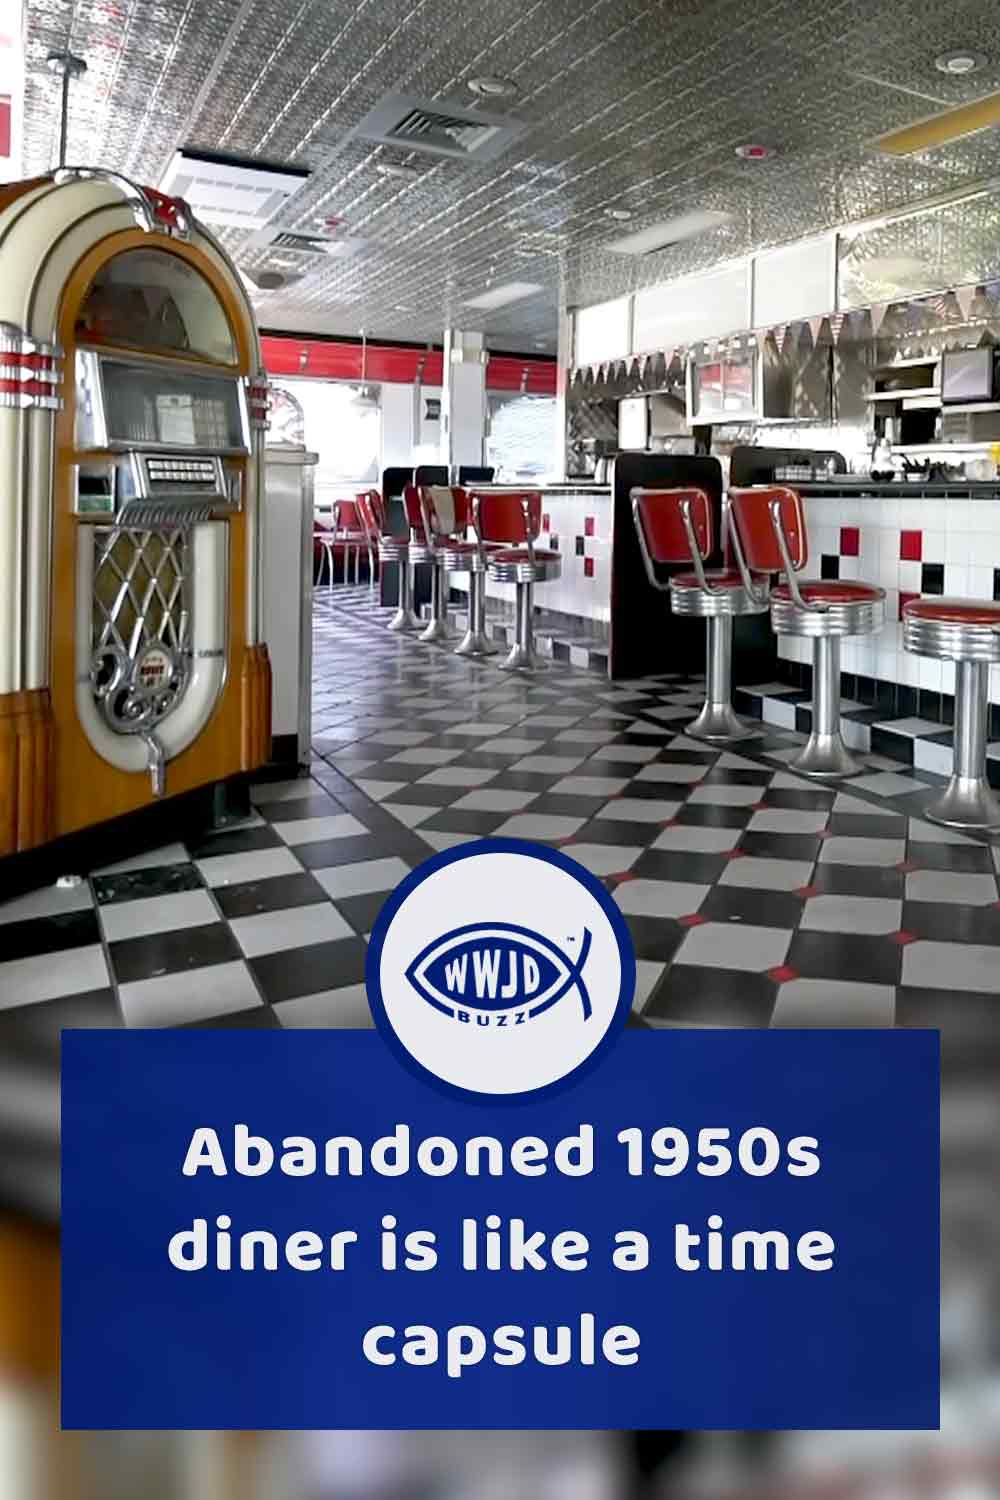 Abandoned 1950s diner is like a time capsule